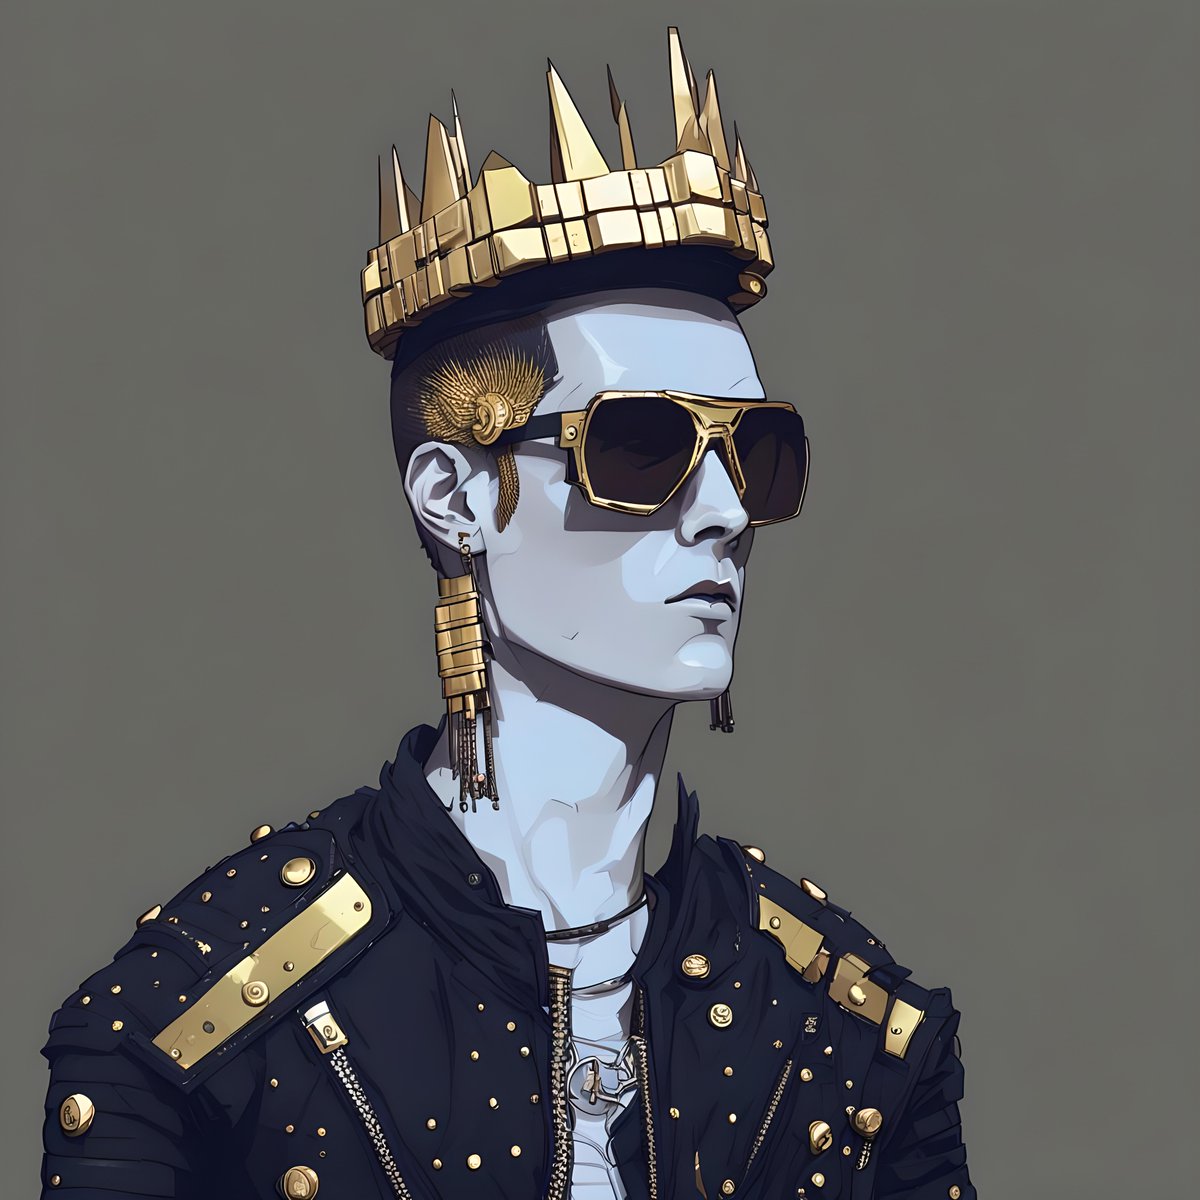 How many likes for this crown punk